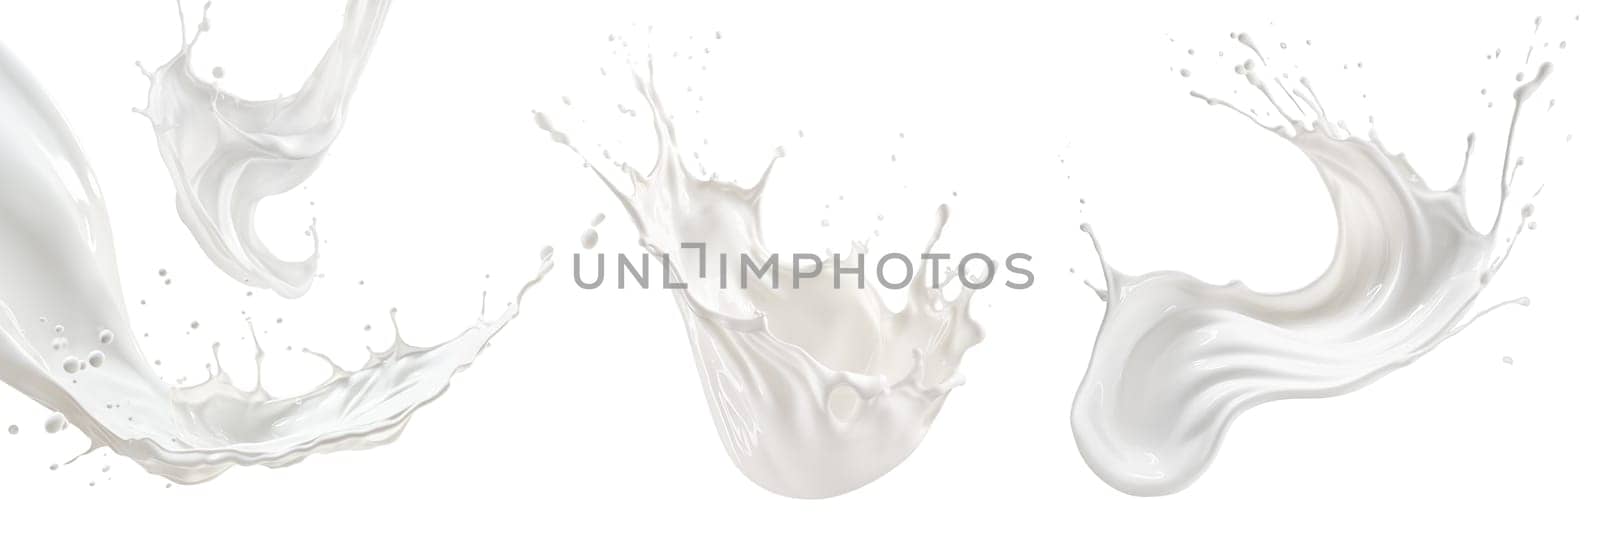 Set of milk splashes isolated on transparent background. Milk splashes and drops flying in different directions isolated on a white background. by SERSOL